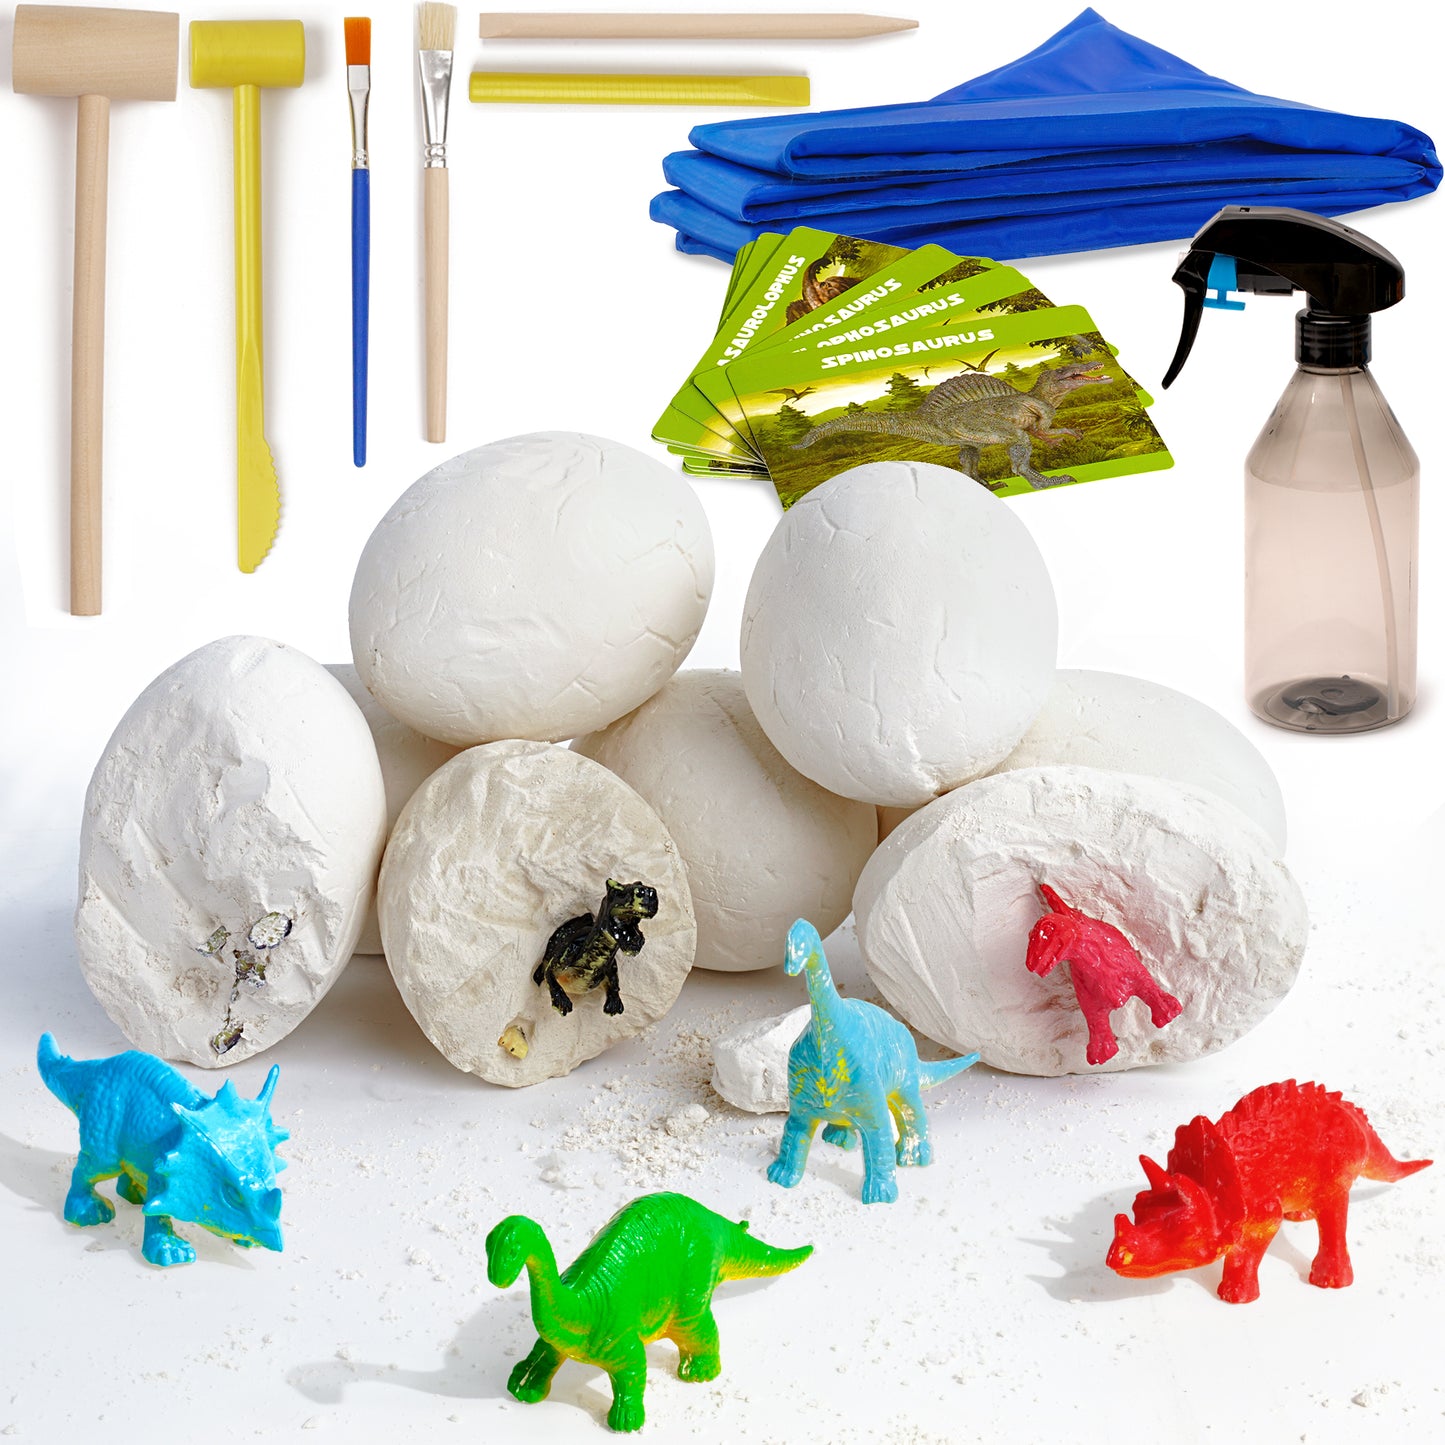 Robotime 12 Pcs Dino Eggs With 2 Sets of Tools Creative Toys For Kids Children DIY Home US Stock Dropshipping